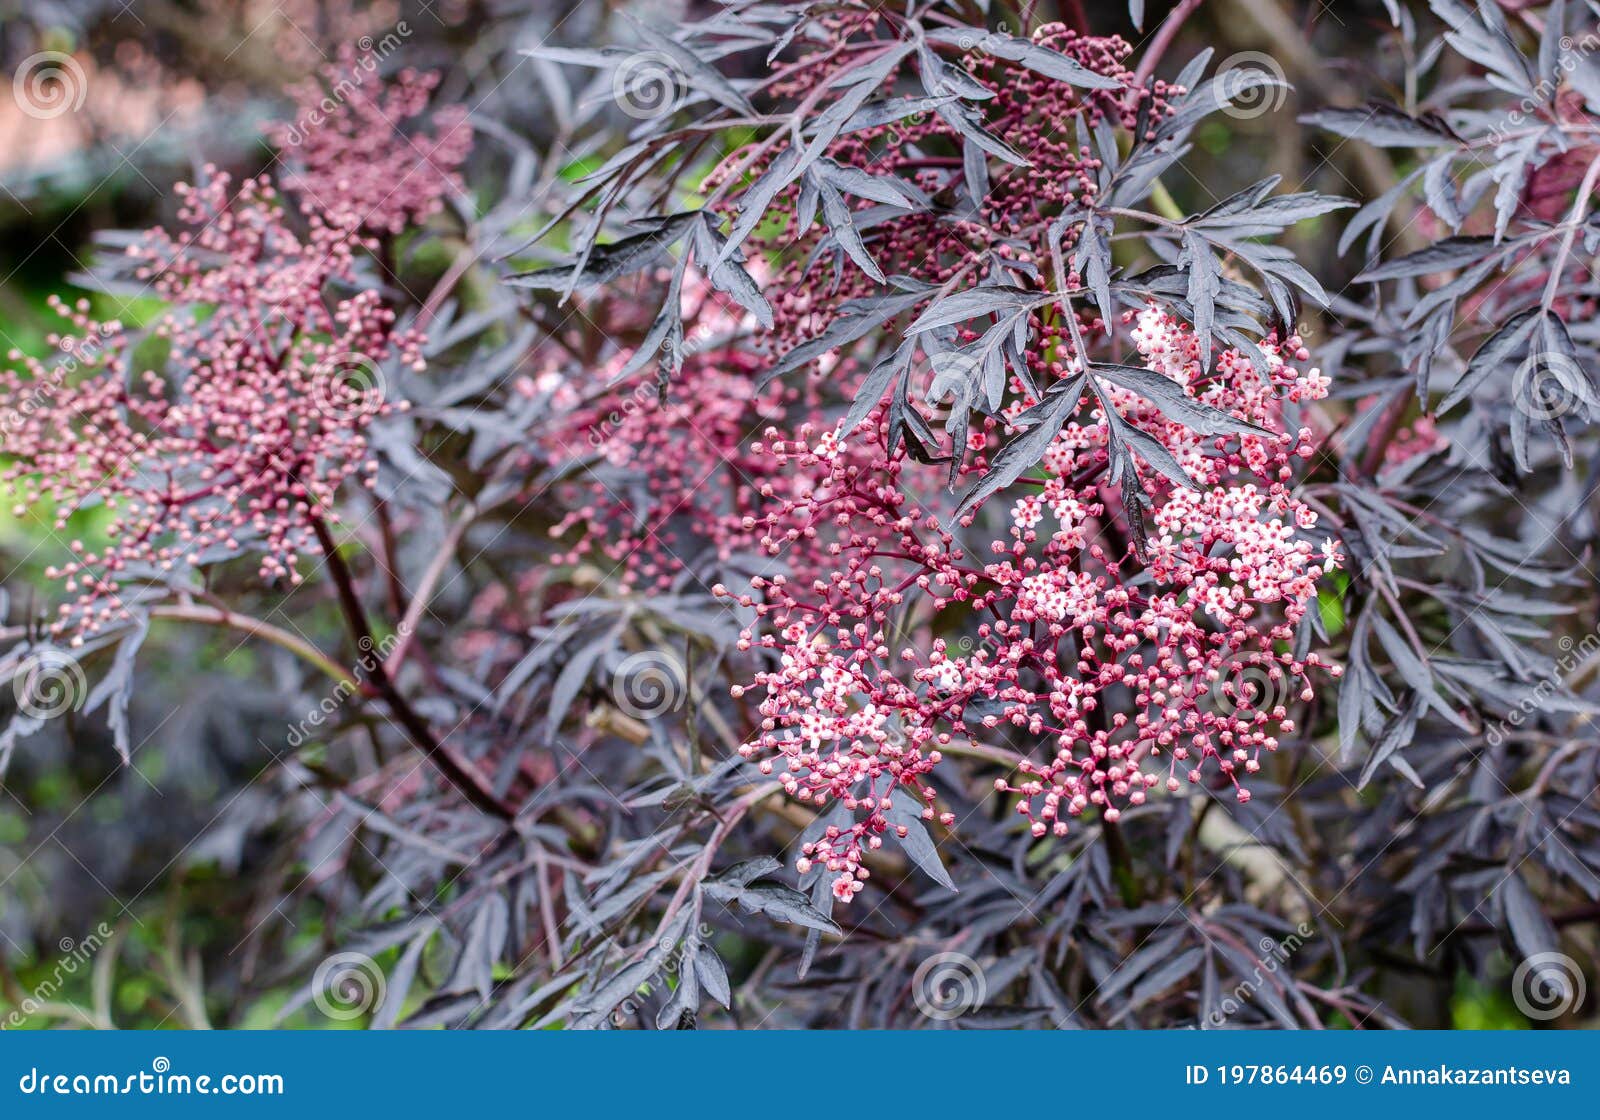 sambucus nigra `eva` is blooming with its black and purple leaves and creamy pink flowers